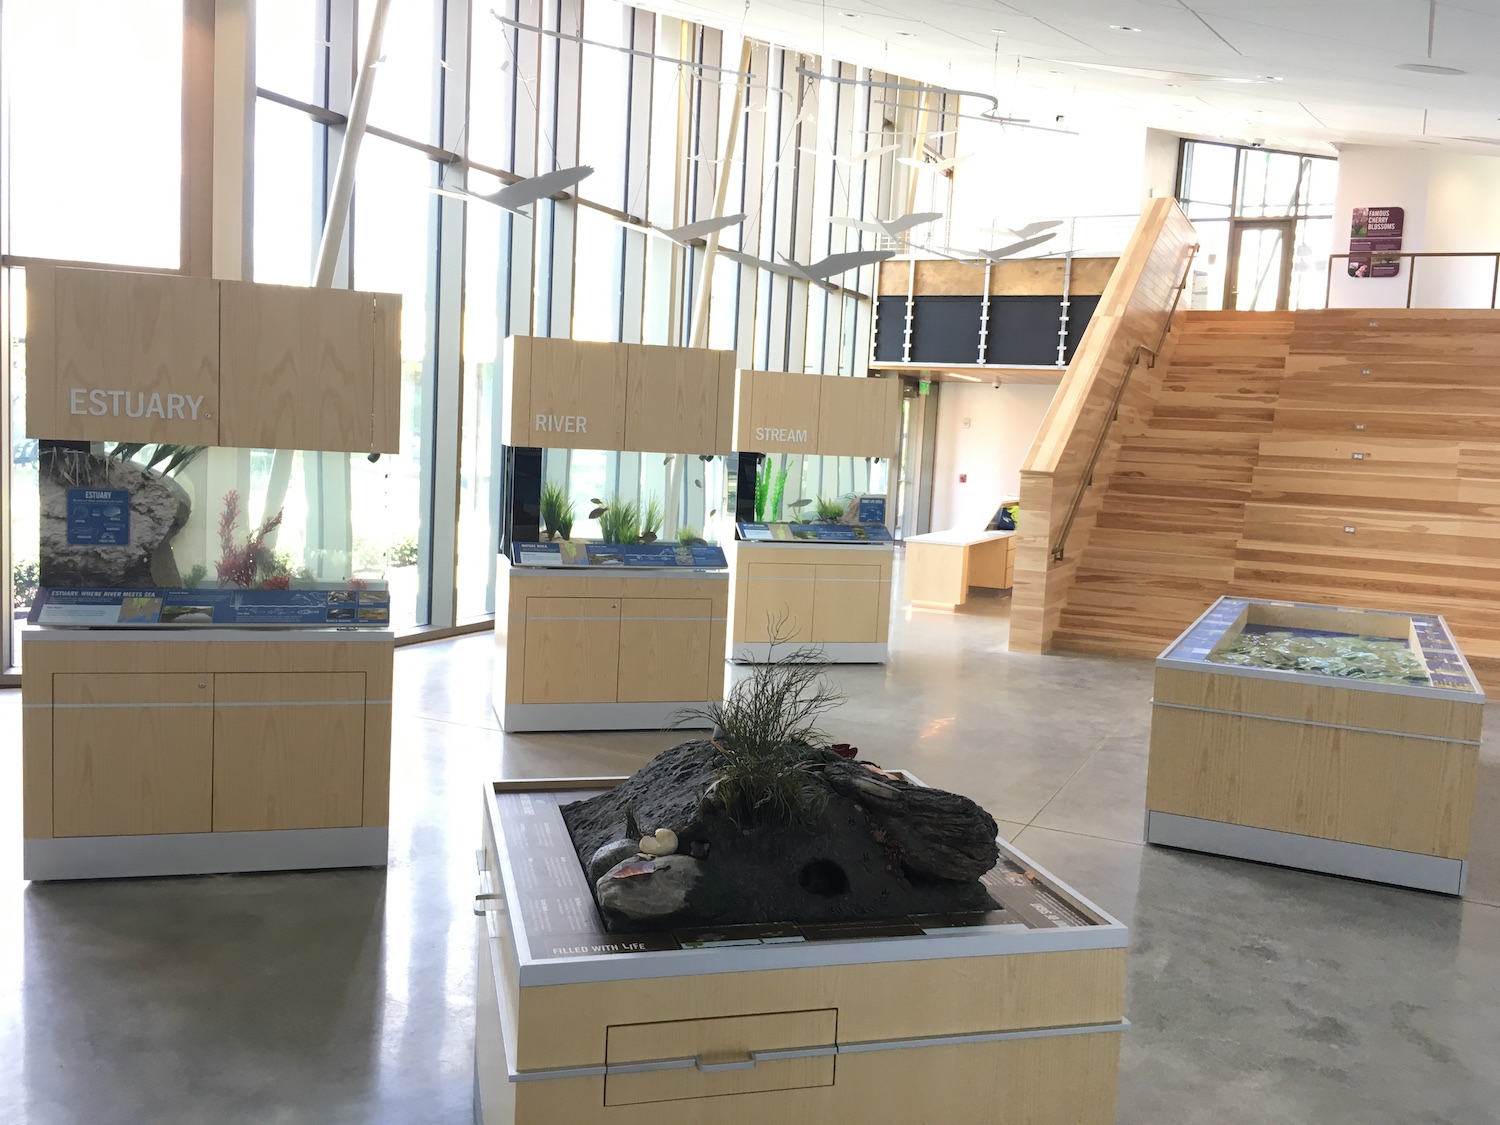 Inside STEM education at the Whittingham Discovery Center